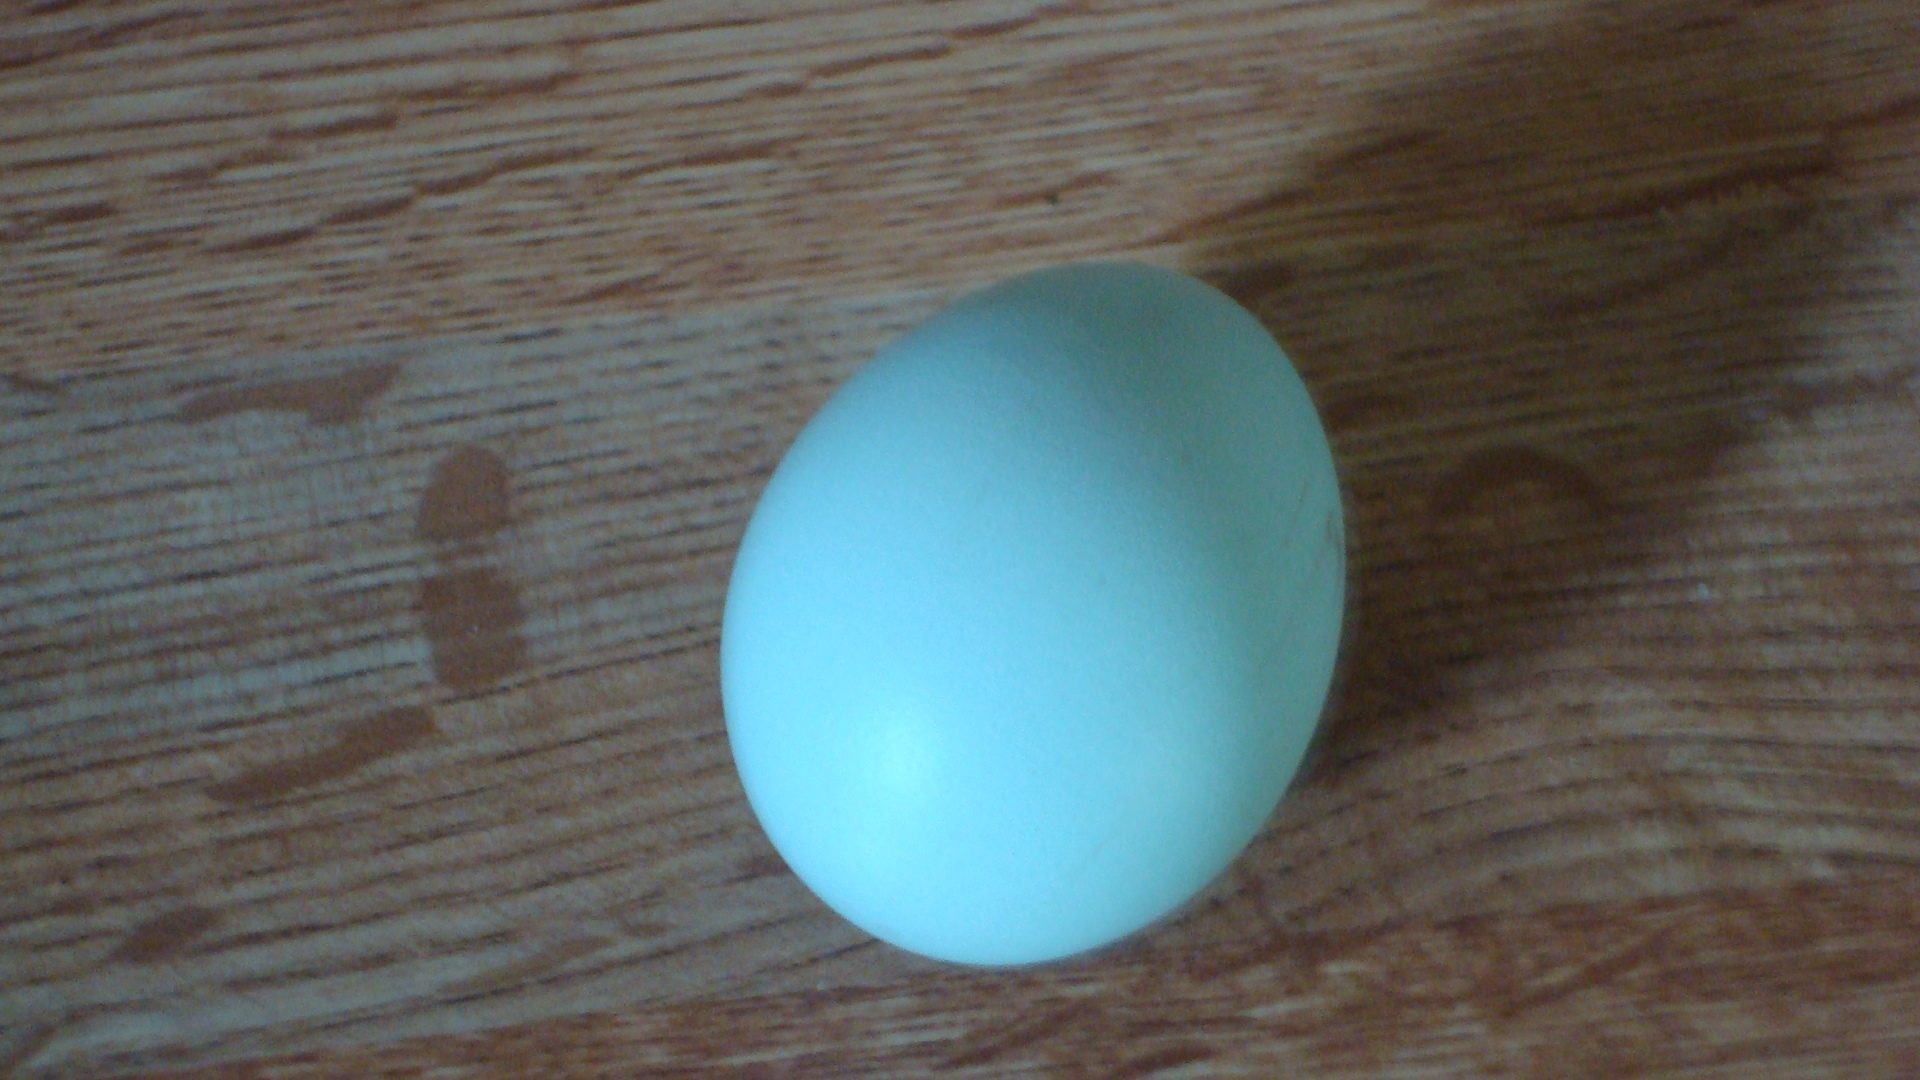 Our first egg